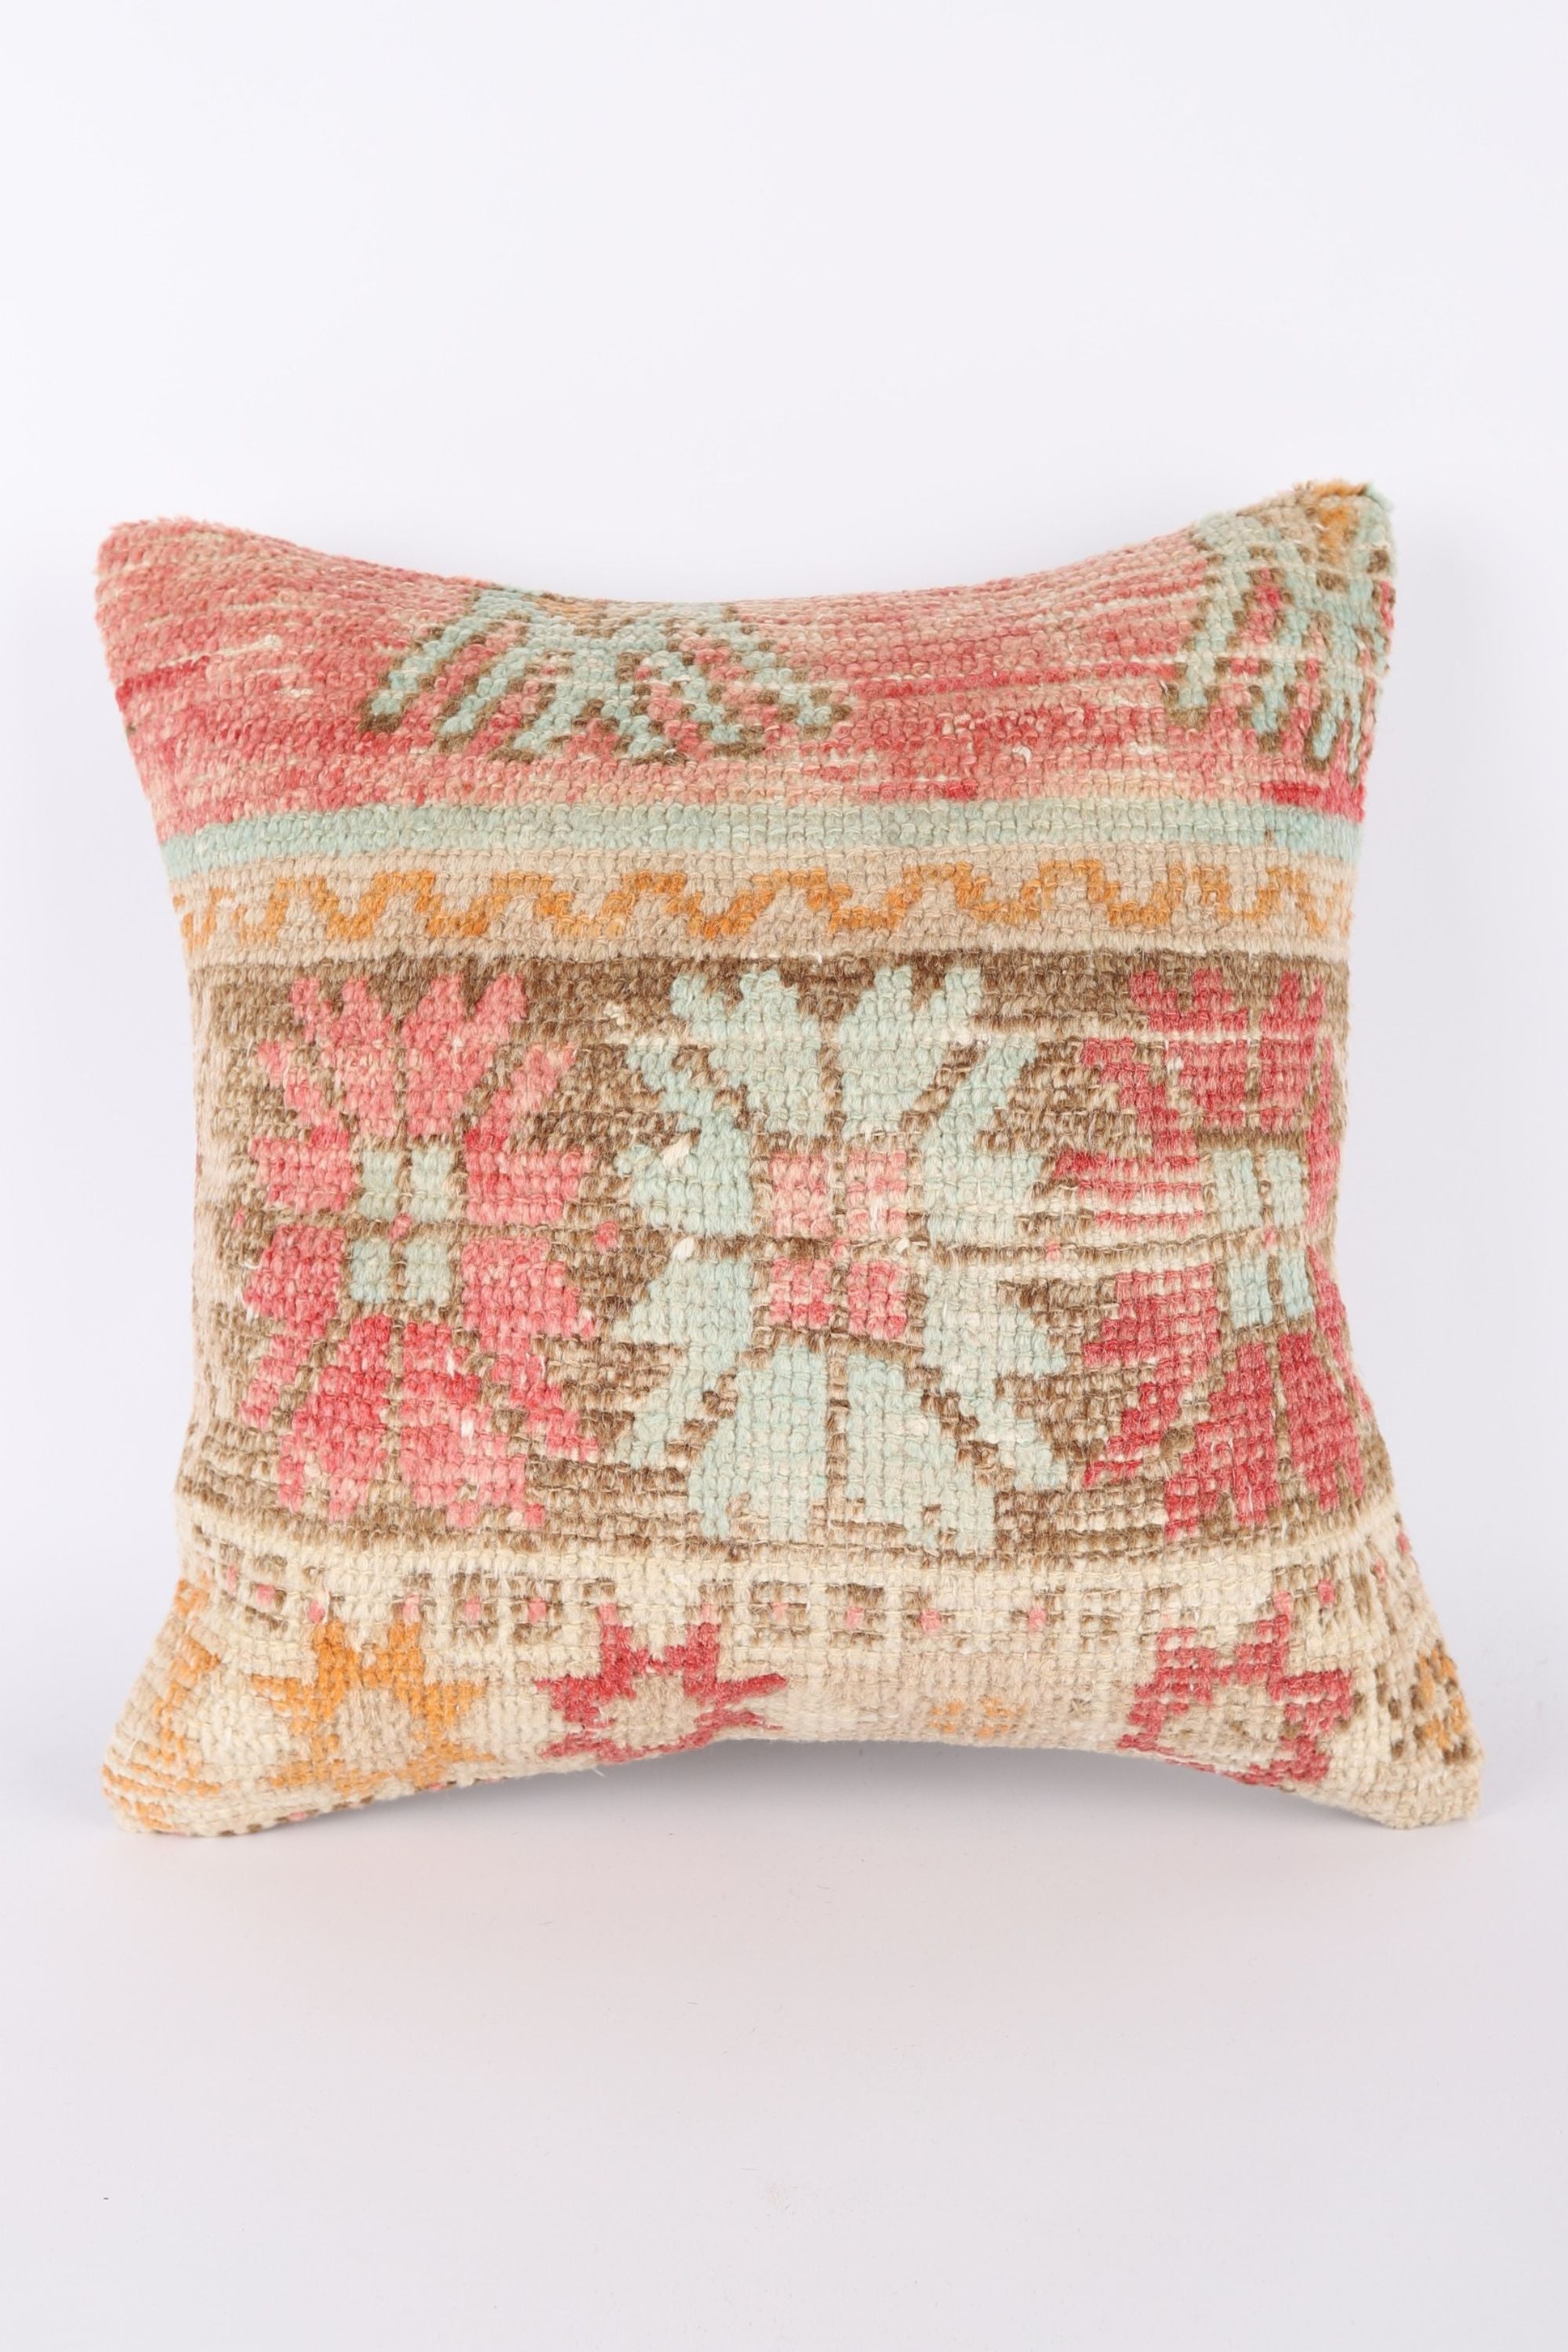 District Loom Pillow Cover No. 1258 for Anthropologie